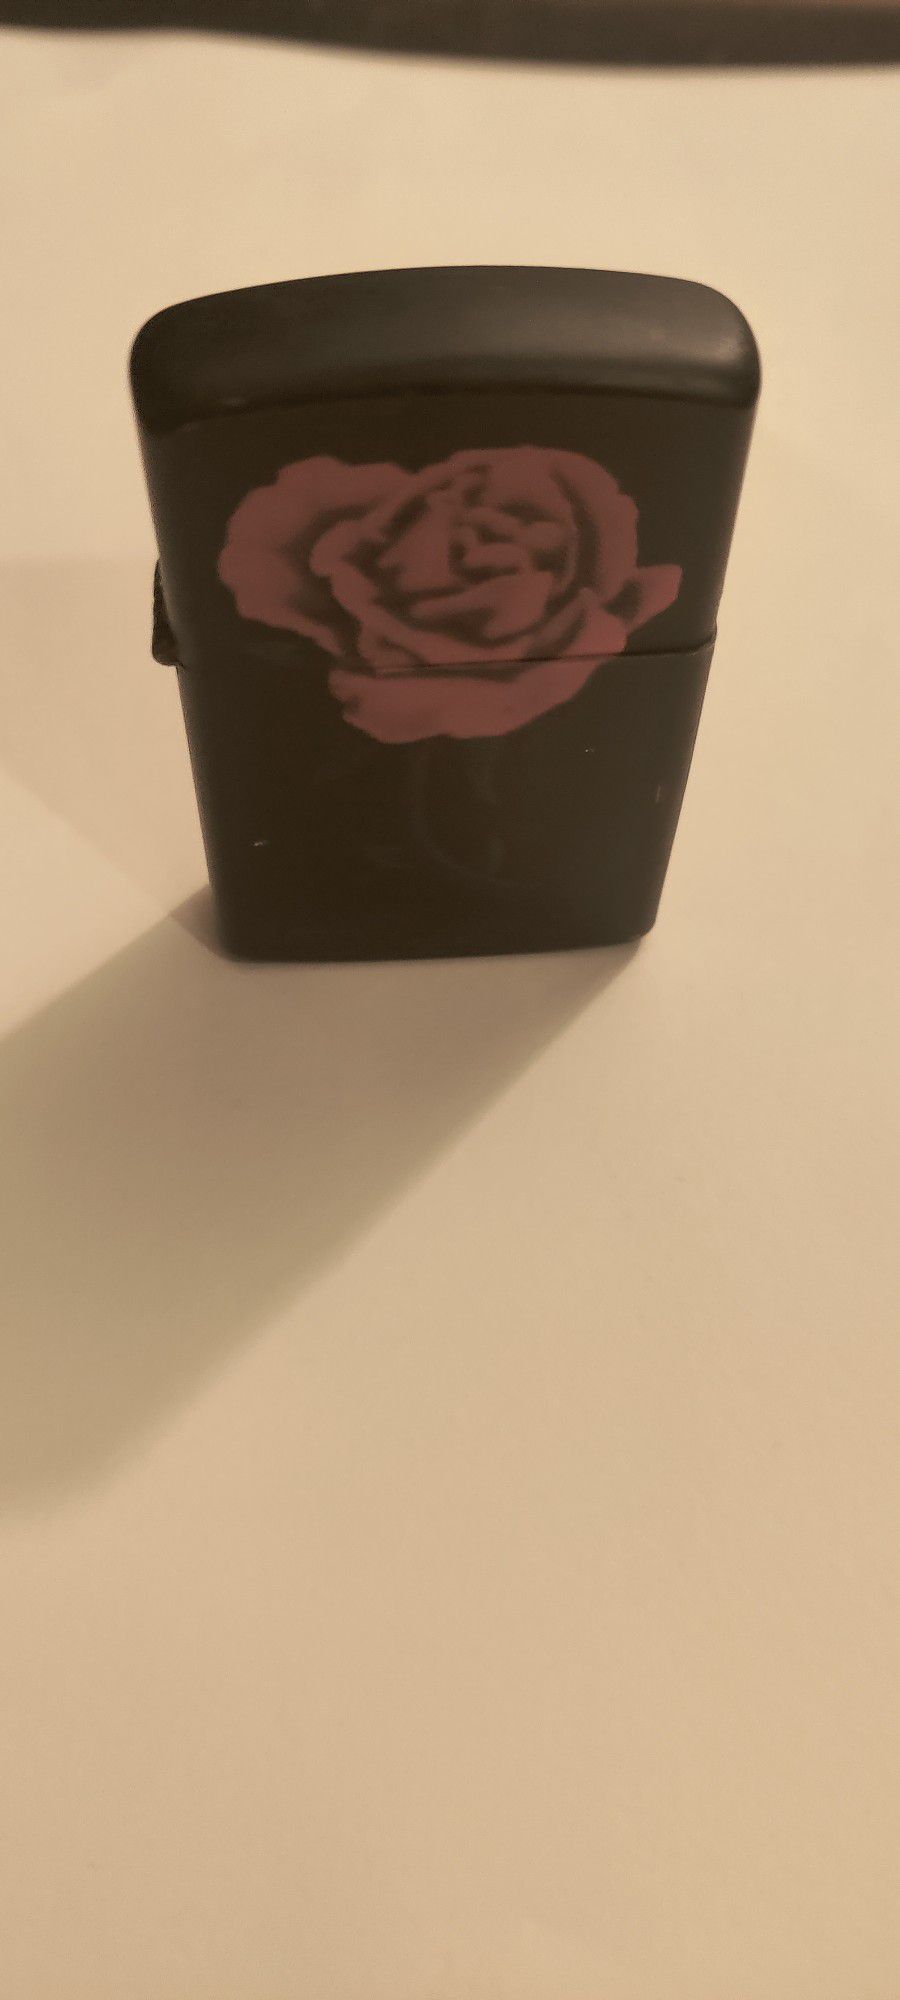 A.A.D.L.P China Zippo Style Lighter Black With Rose On Front 